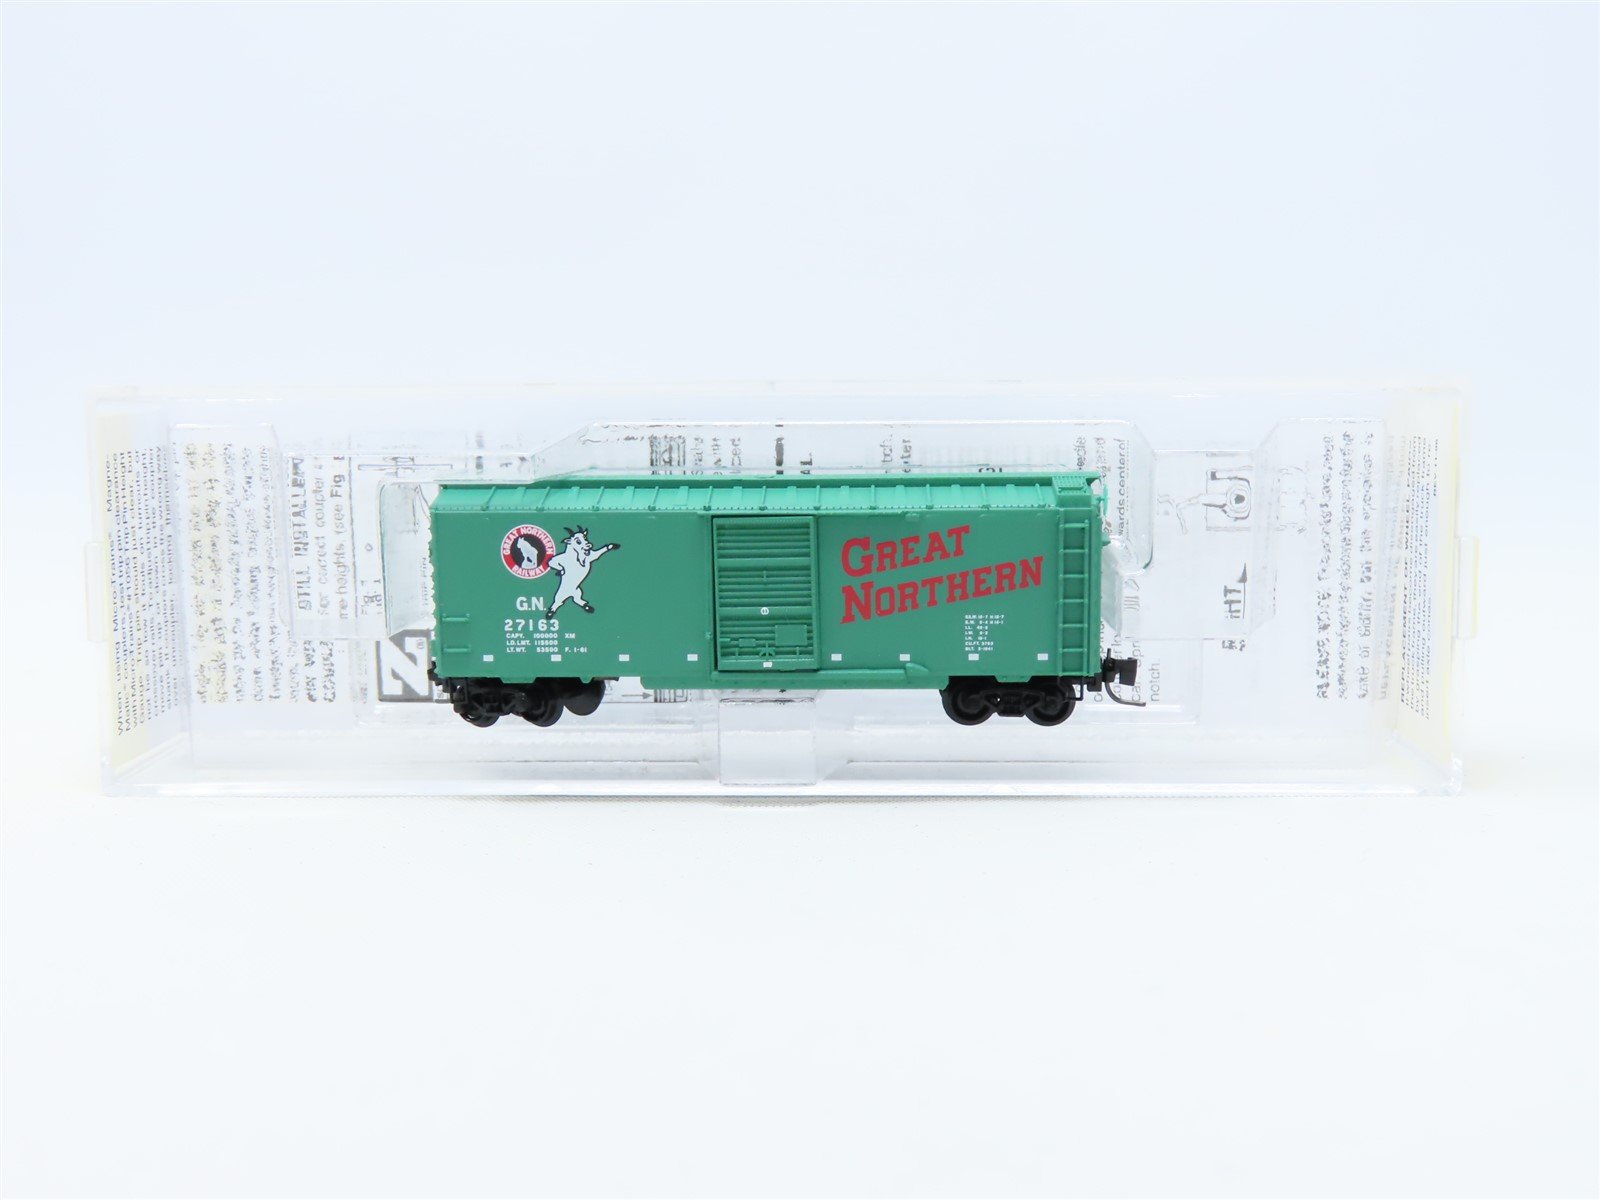 Z Scale Micro-Trains MTL #50000442 GN Great Northern "Goat" 40' Box Car #27163